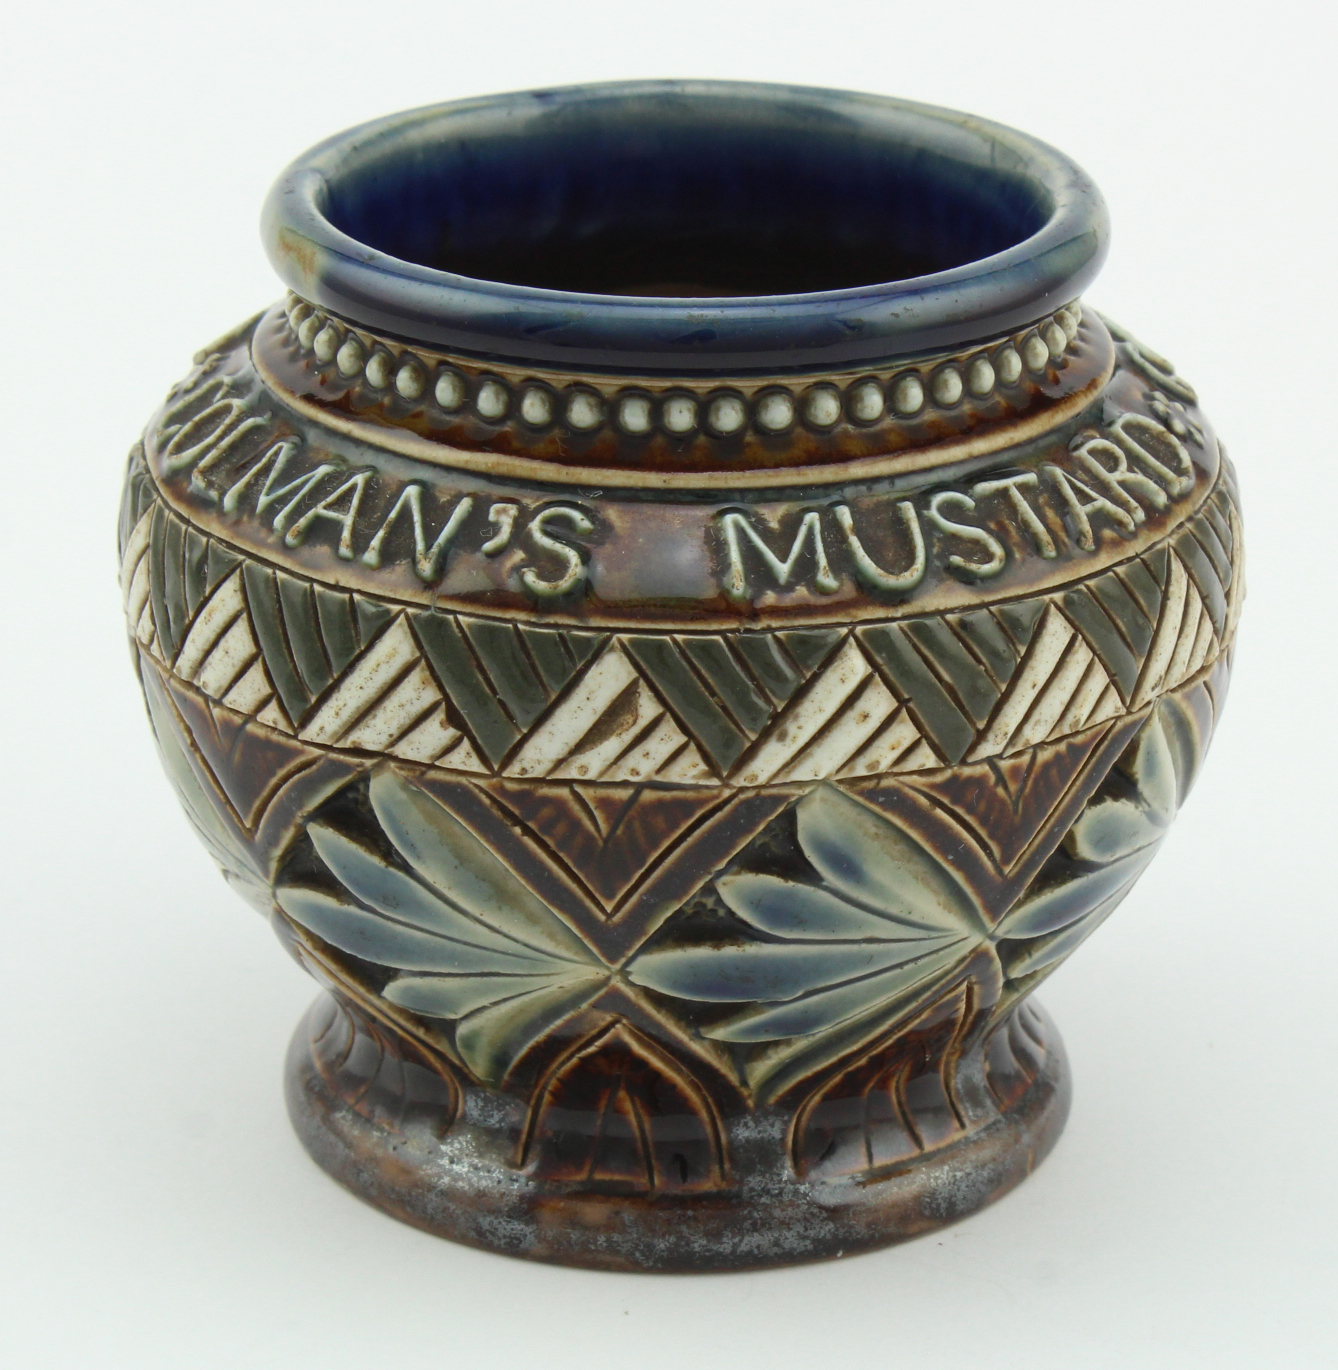 Colman's Mustard mixed lot comprising a Doulton Lambeth pottery mustard pot dated 1884, possibly - Image 2 of 2